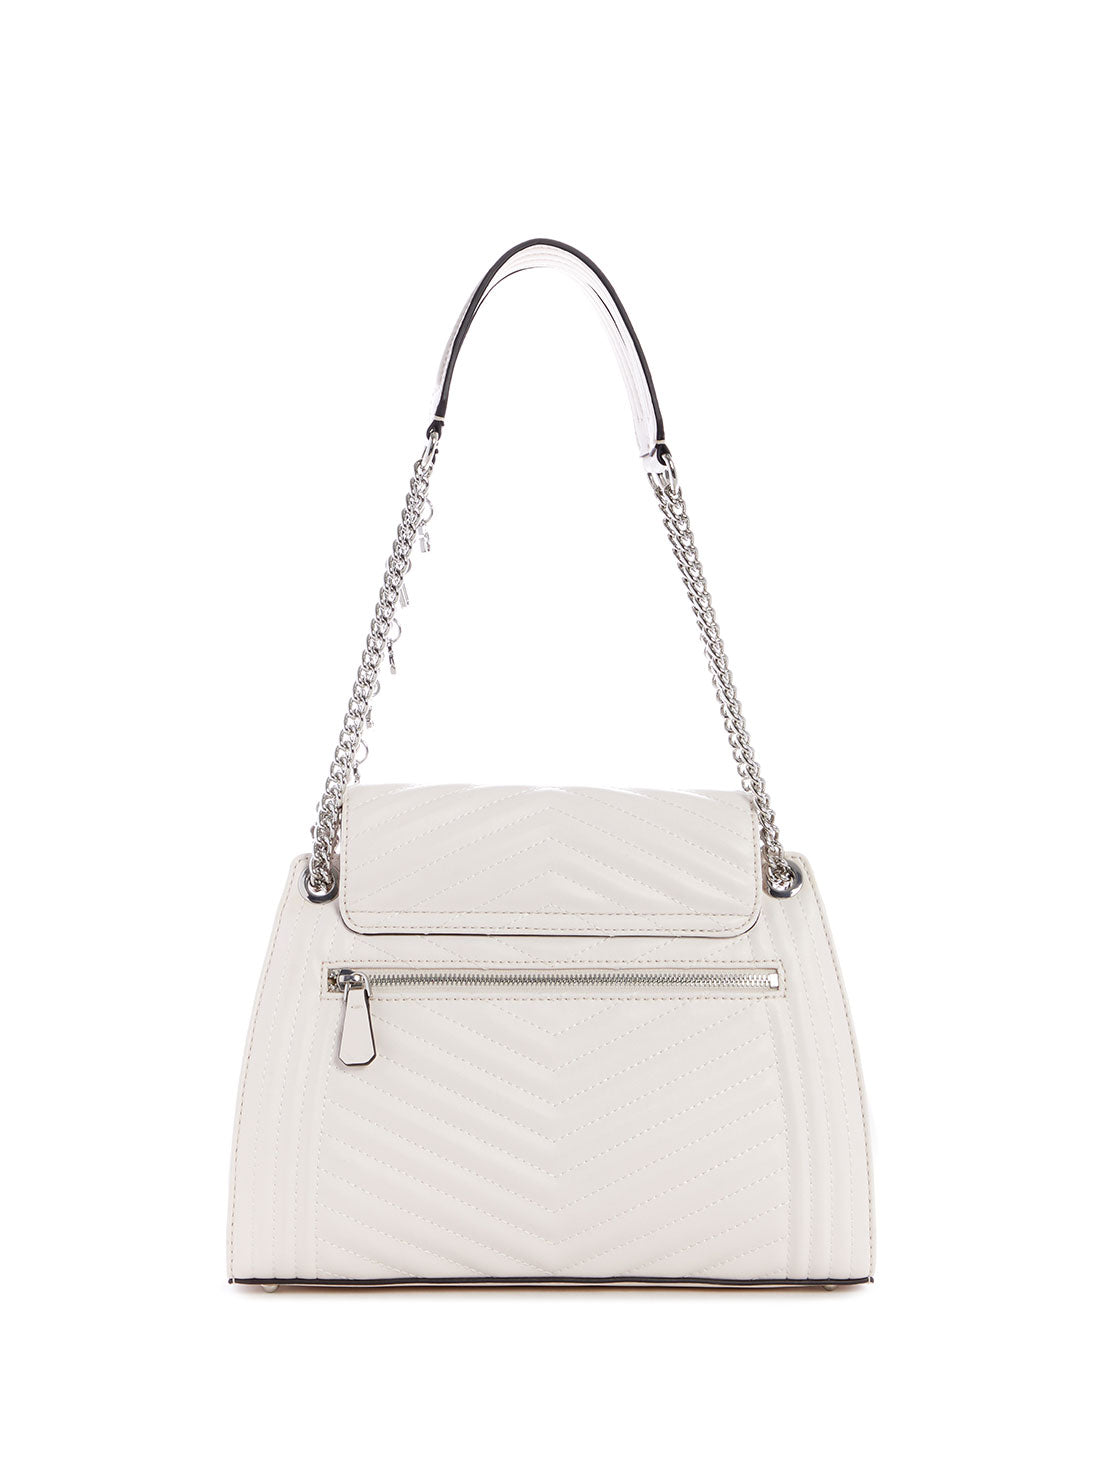 GUESS Womens White Lida Convertible Shoulder Satchel  VY812709 Back View